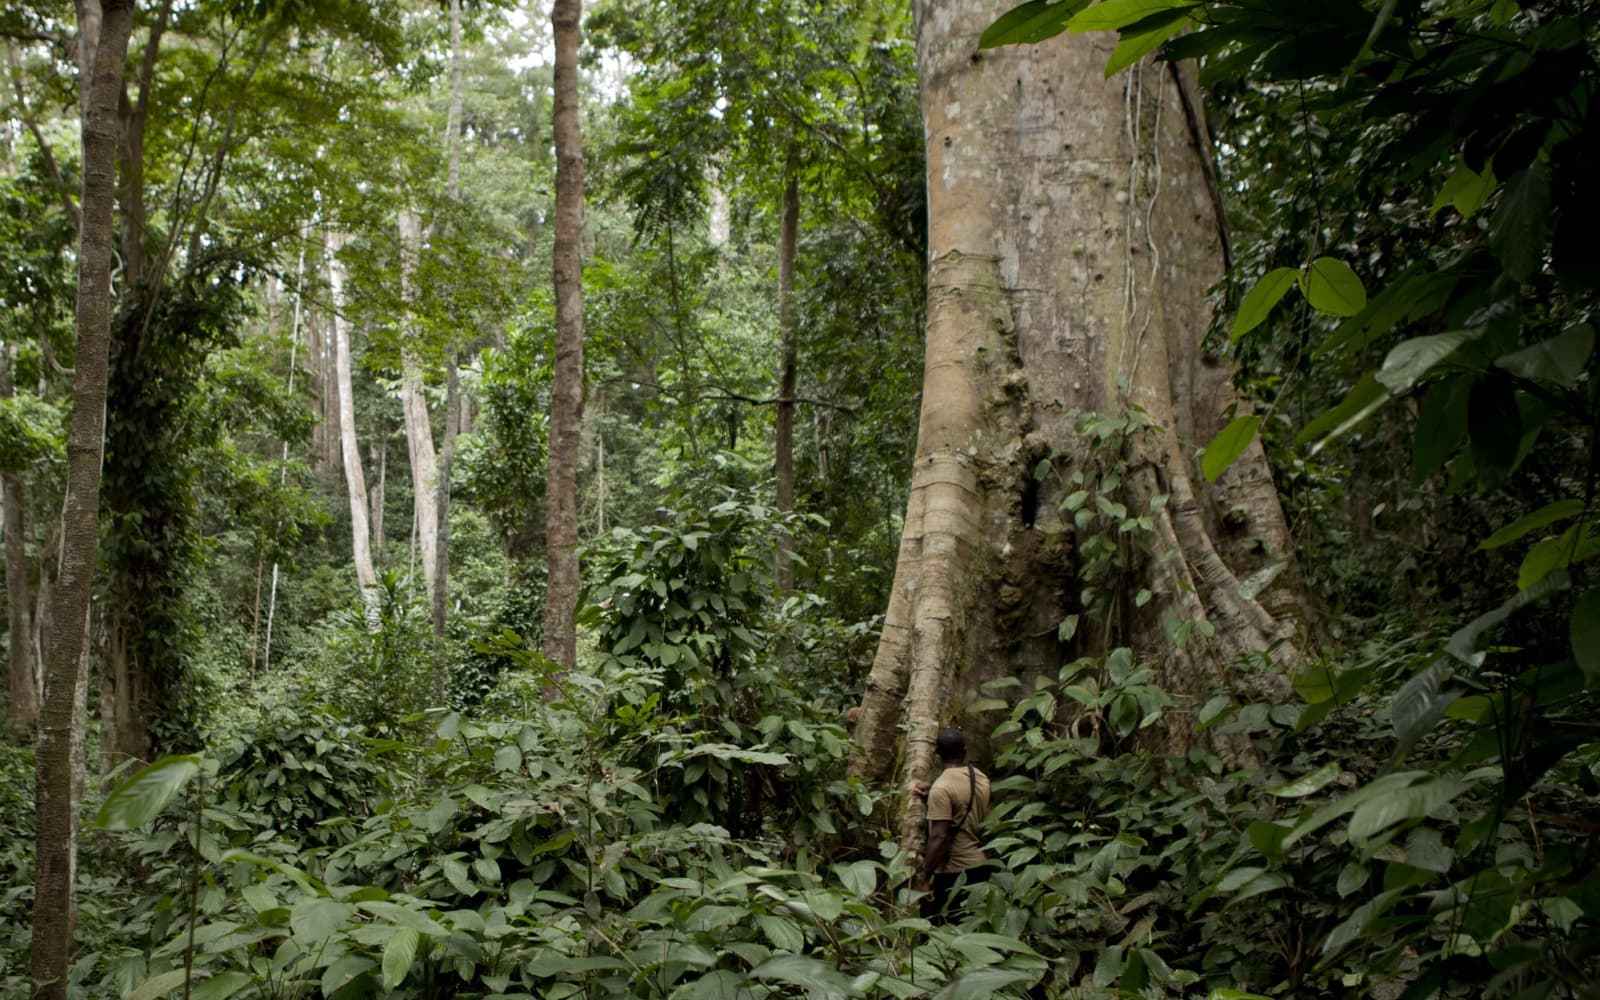 As leaders pledge to protect forests, Gabon suggests how